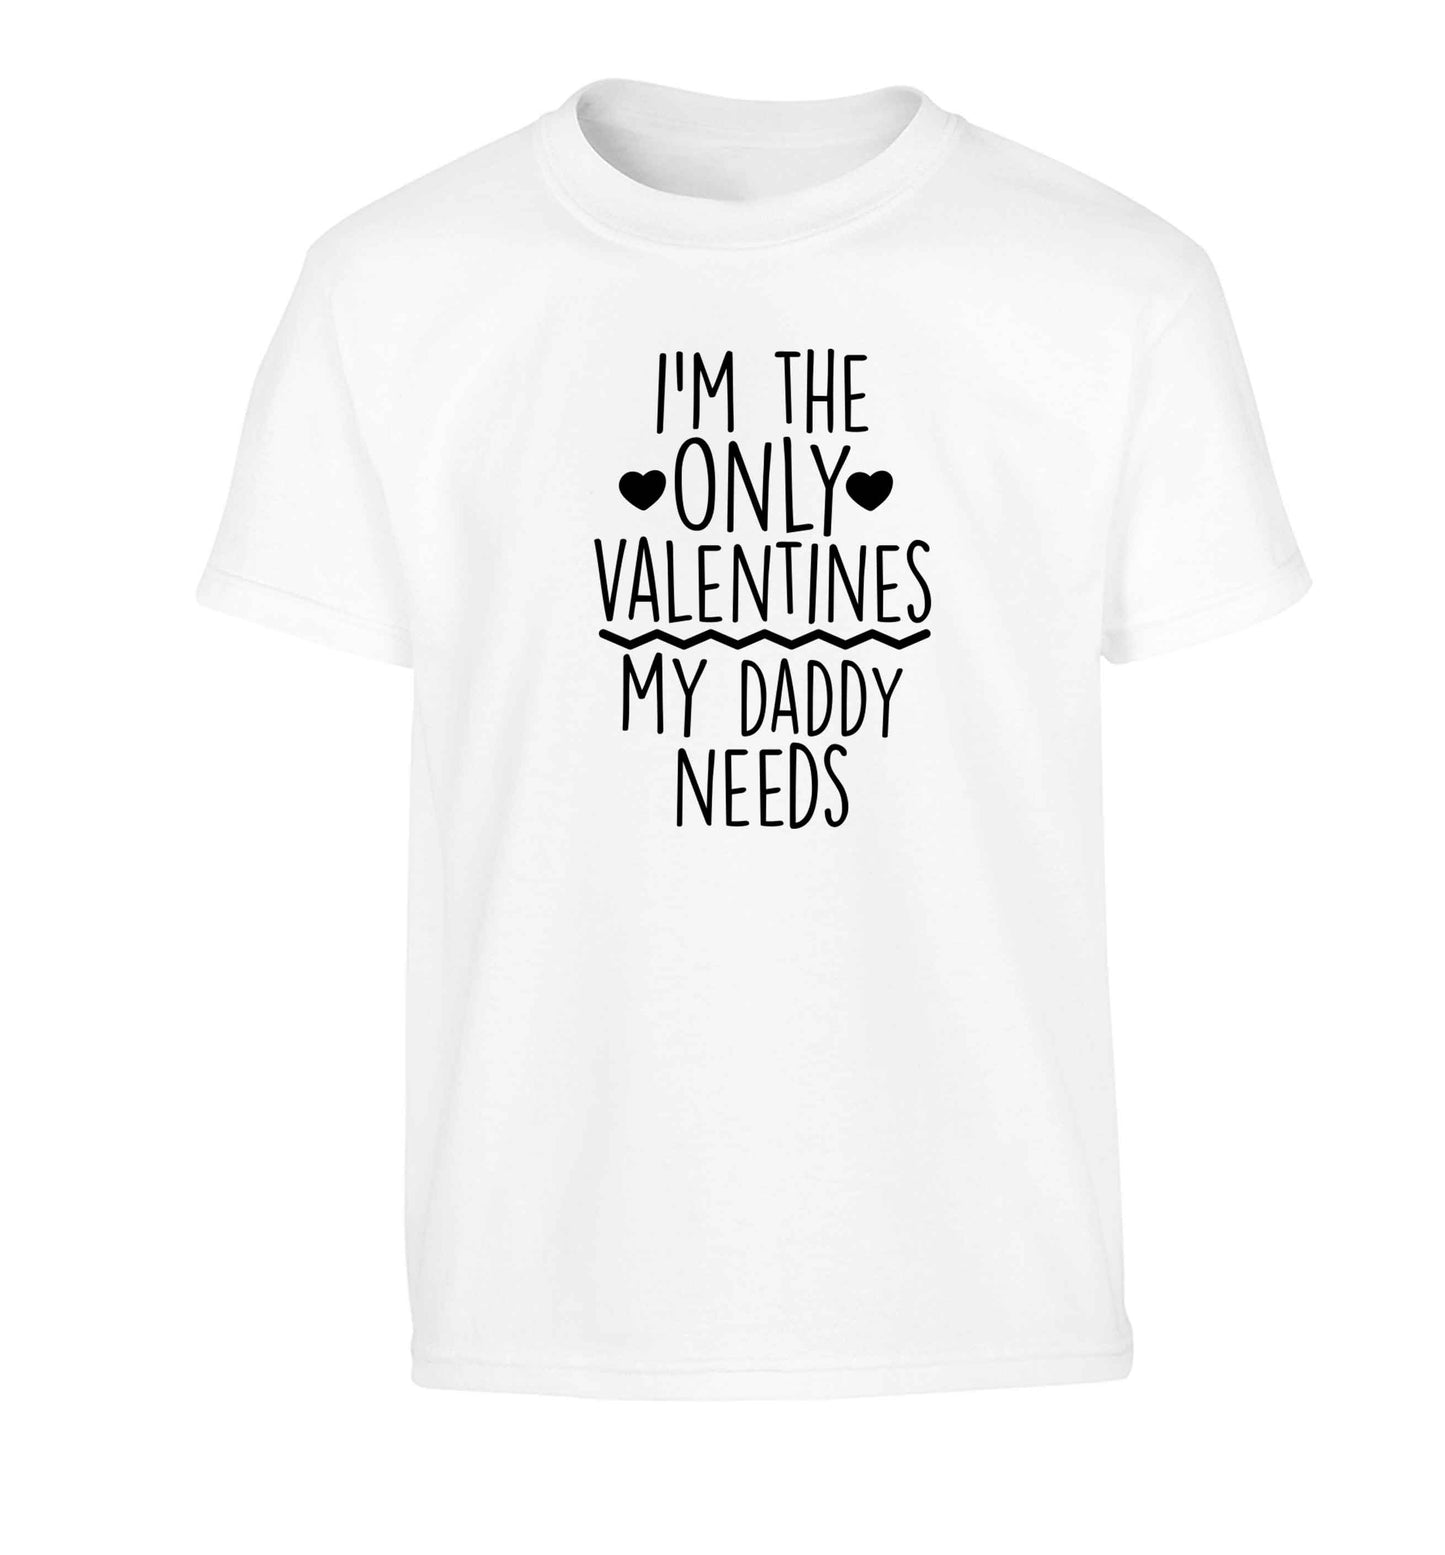 I'm the only valentines my daddy needs Children's white Tshirt 12-13 Years